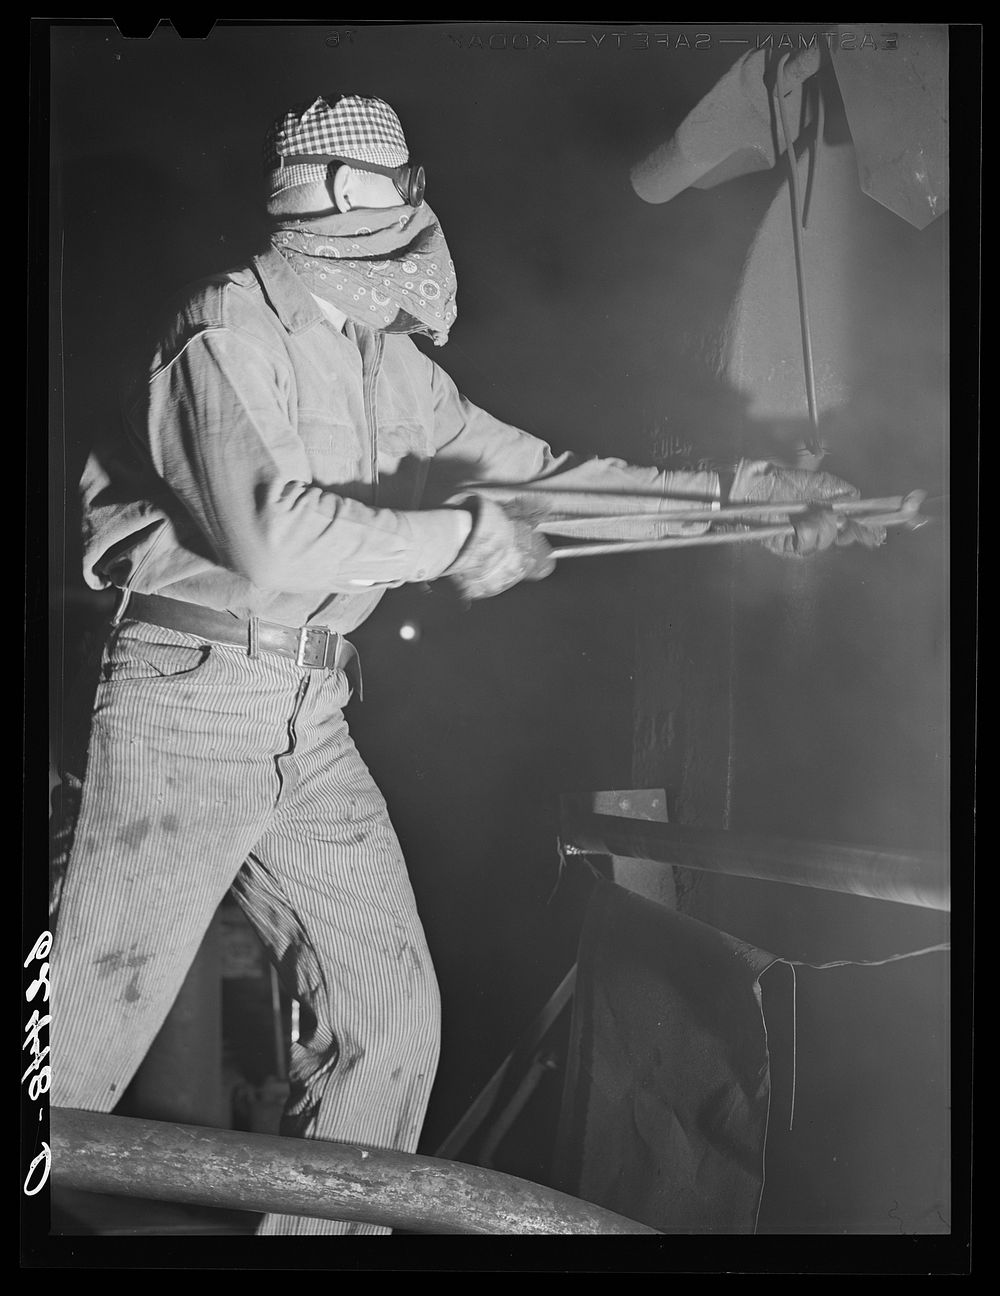 Worker at rolling mill. Washington Tinplate Company, Washington, Pennsylvania. Sourced from the Library of Congress.